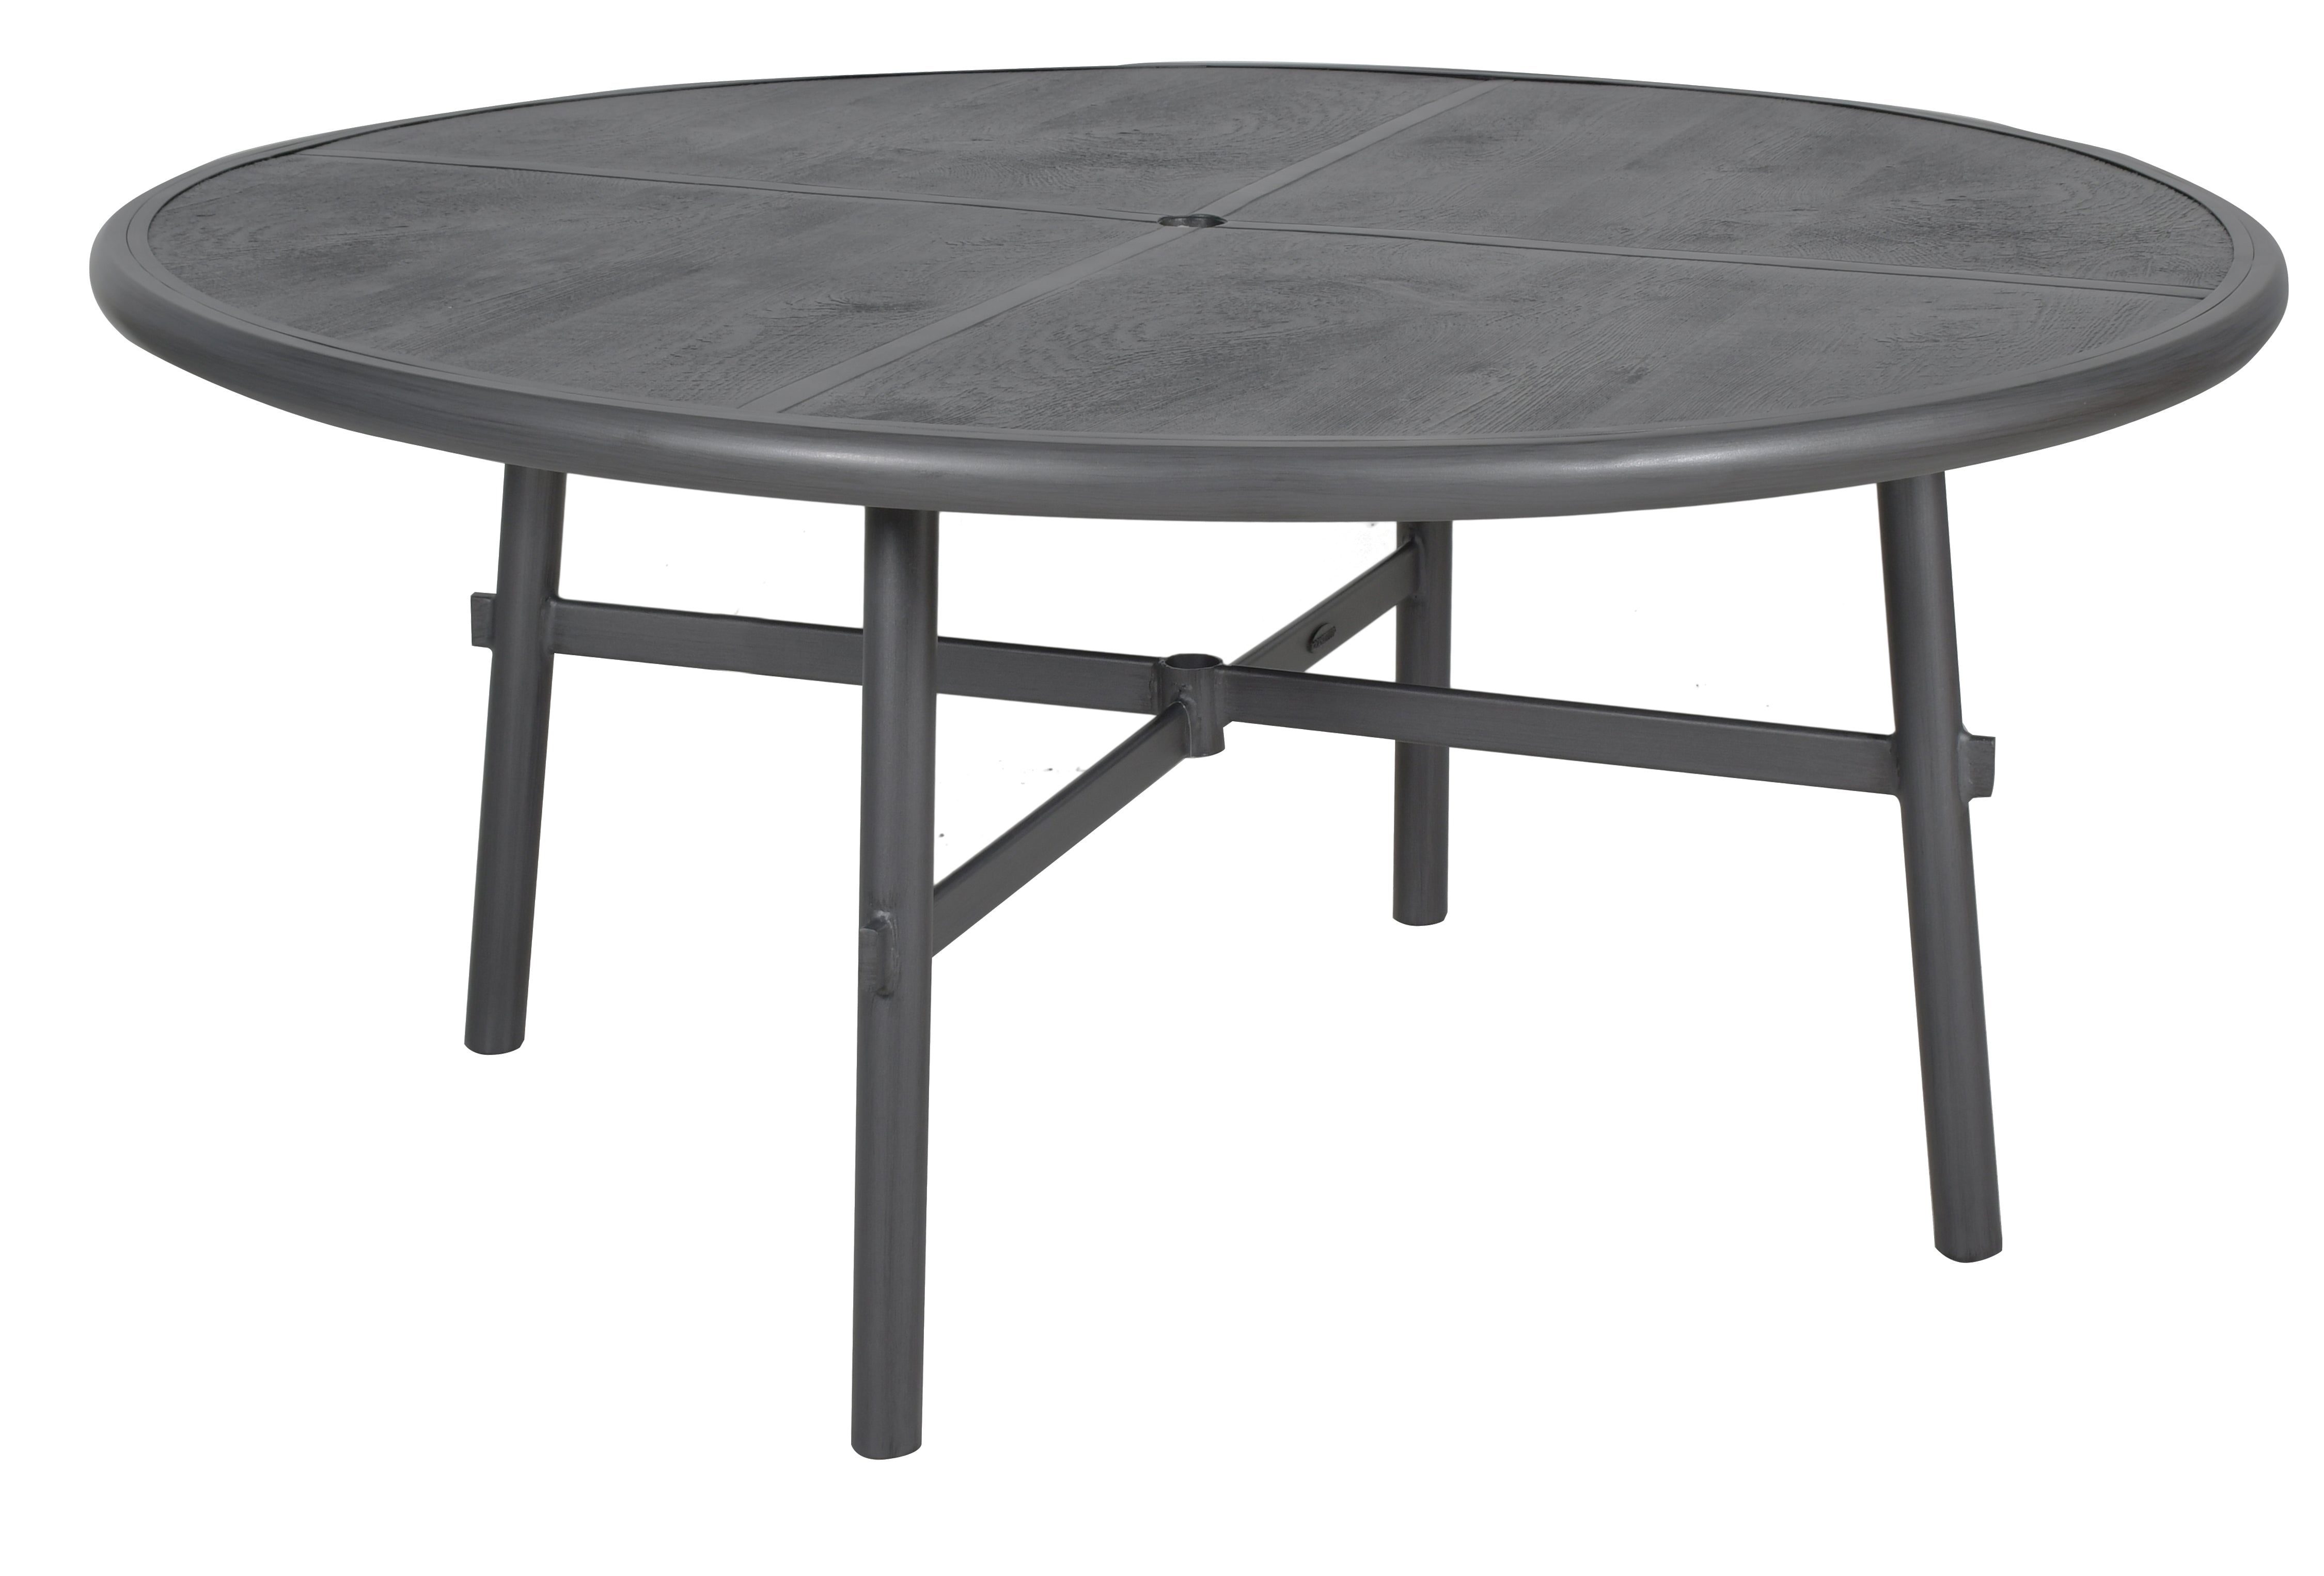 Barbados 60" Round Dining Table By Castelle